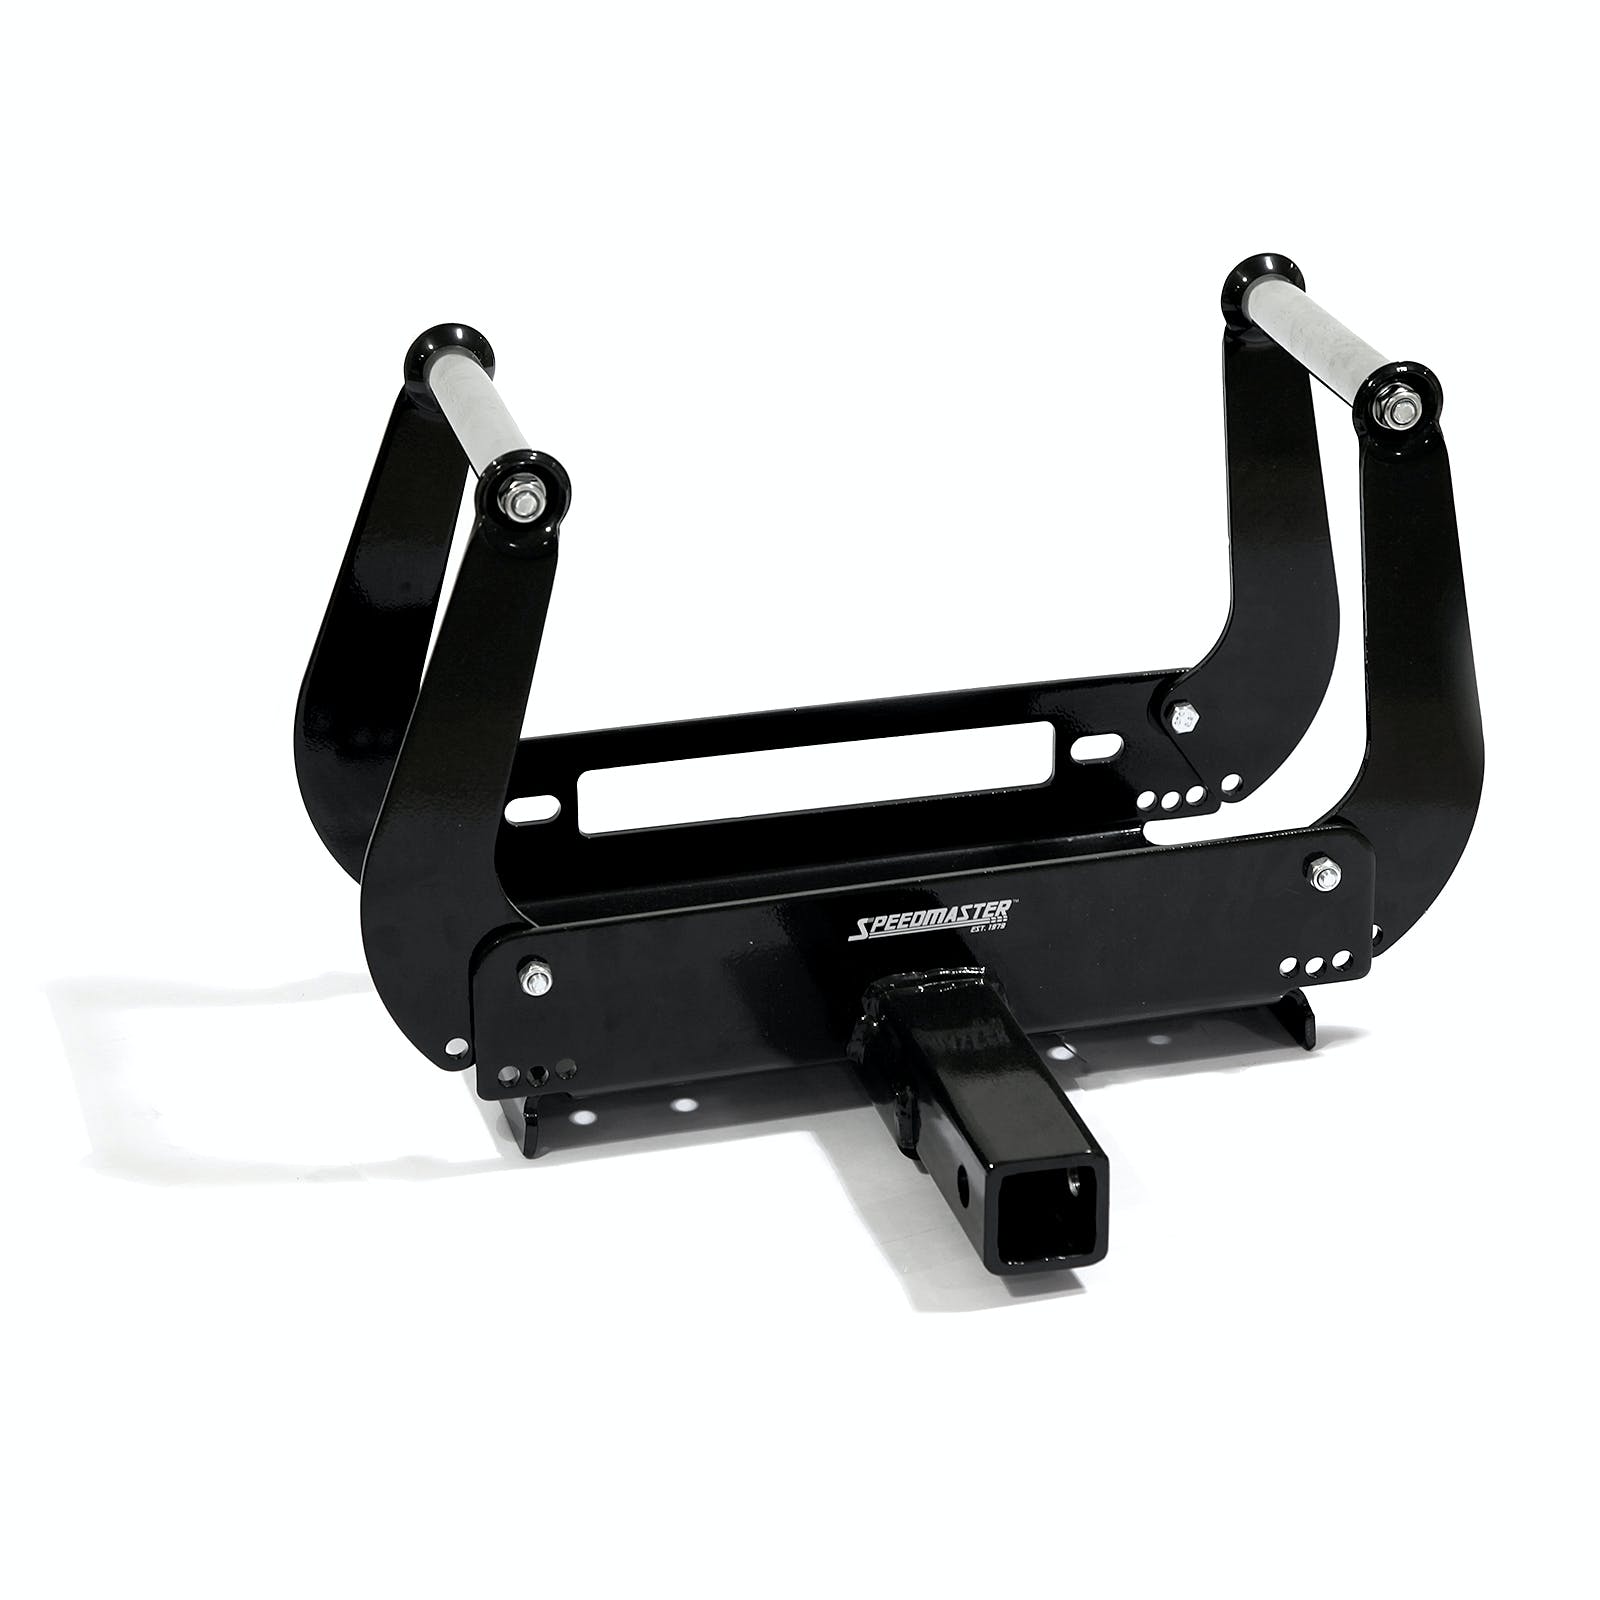 Speedmaster PCE562.1001 4wd Foldable Winch Mounting Plate Cradle Front/Rear Bull Bar 2 Rec. Hitch